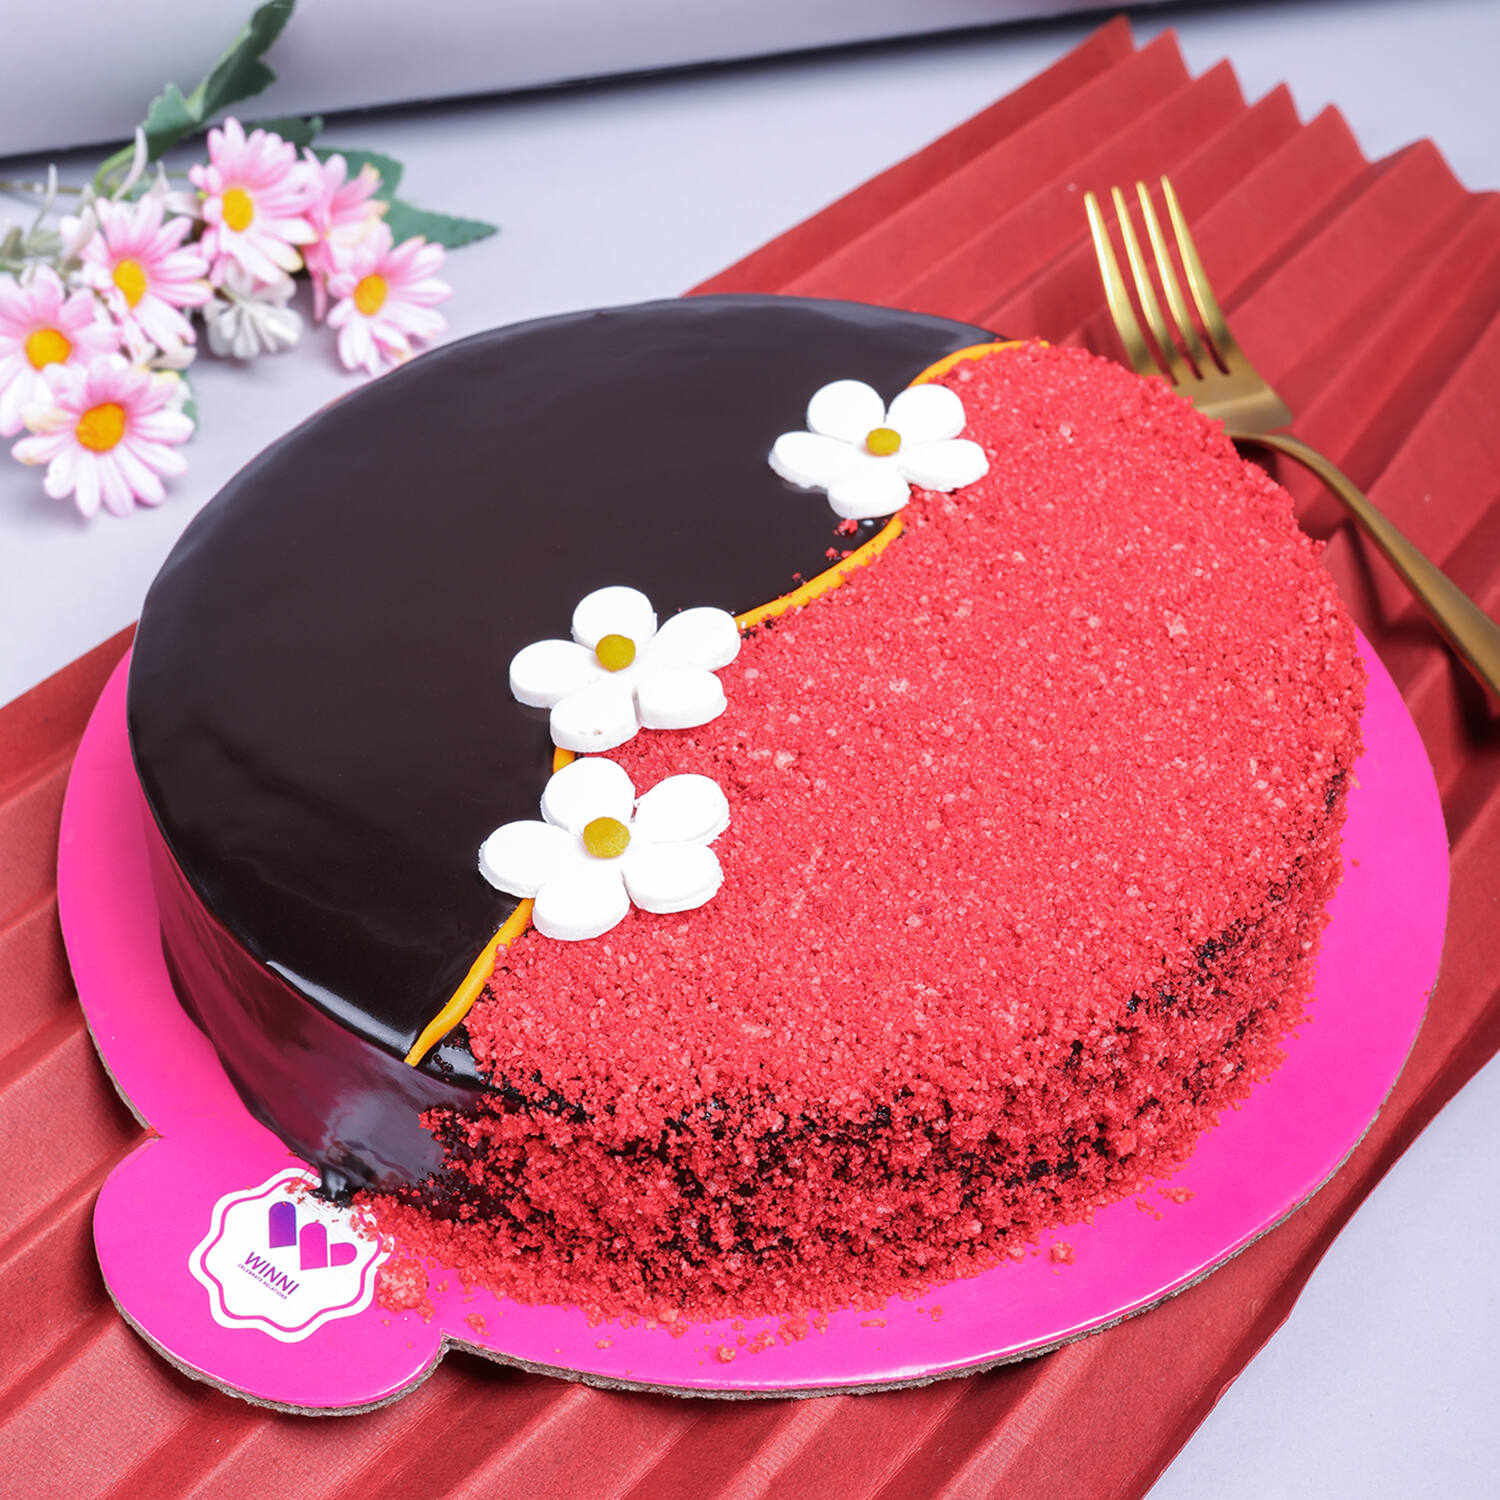 Red Velvet Cake online cake delivery., 24x7 Home delivery of Cake in  Gachibowli Hyderabad, Hyderabad